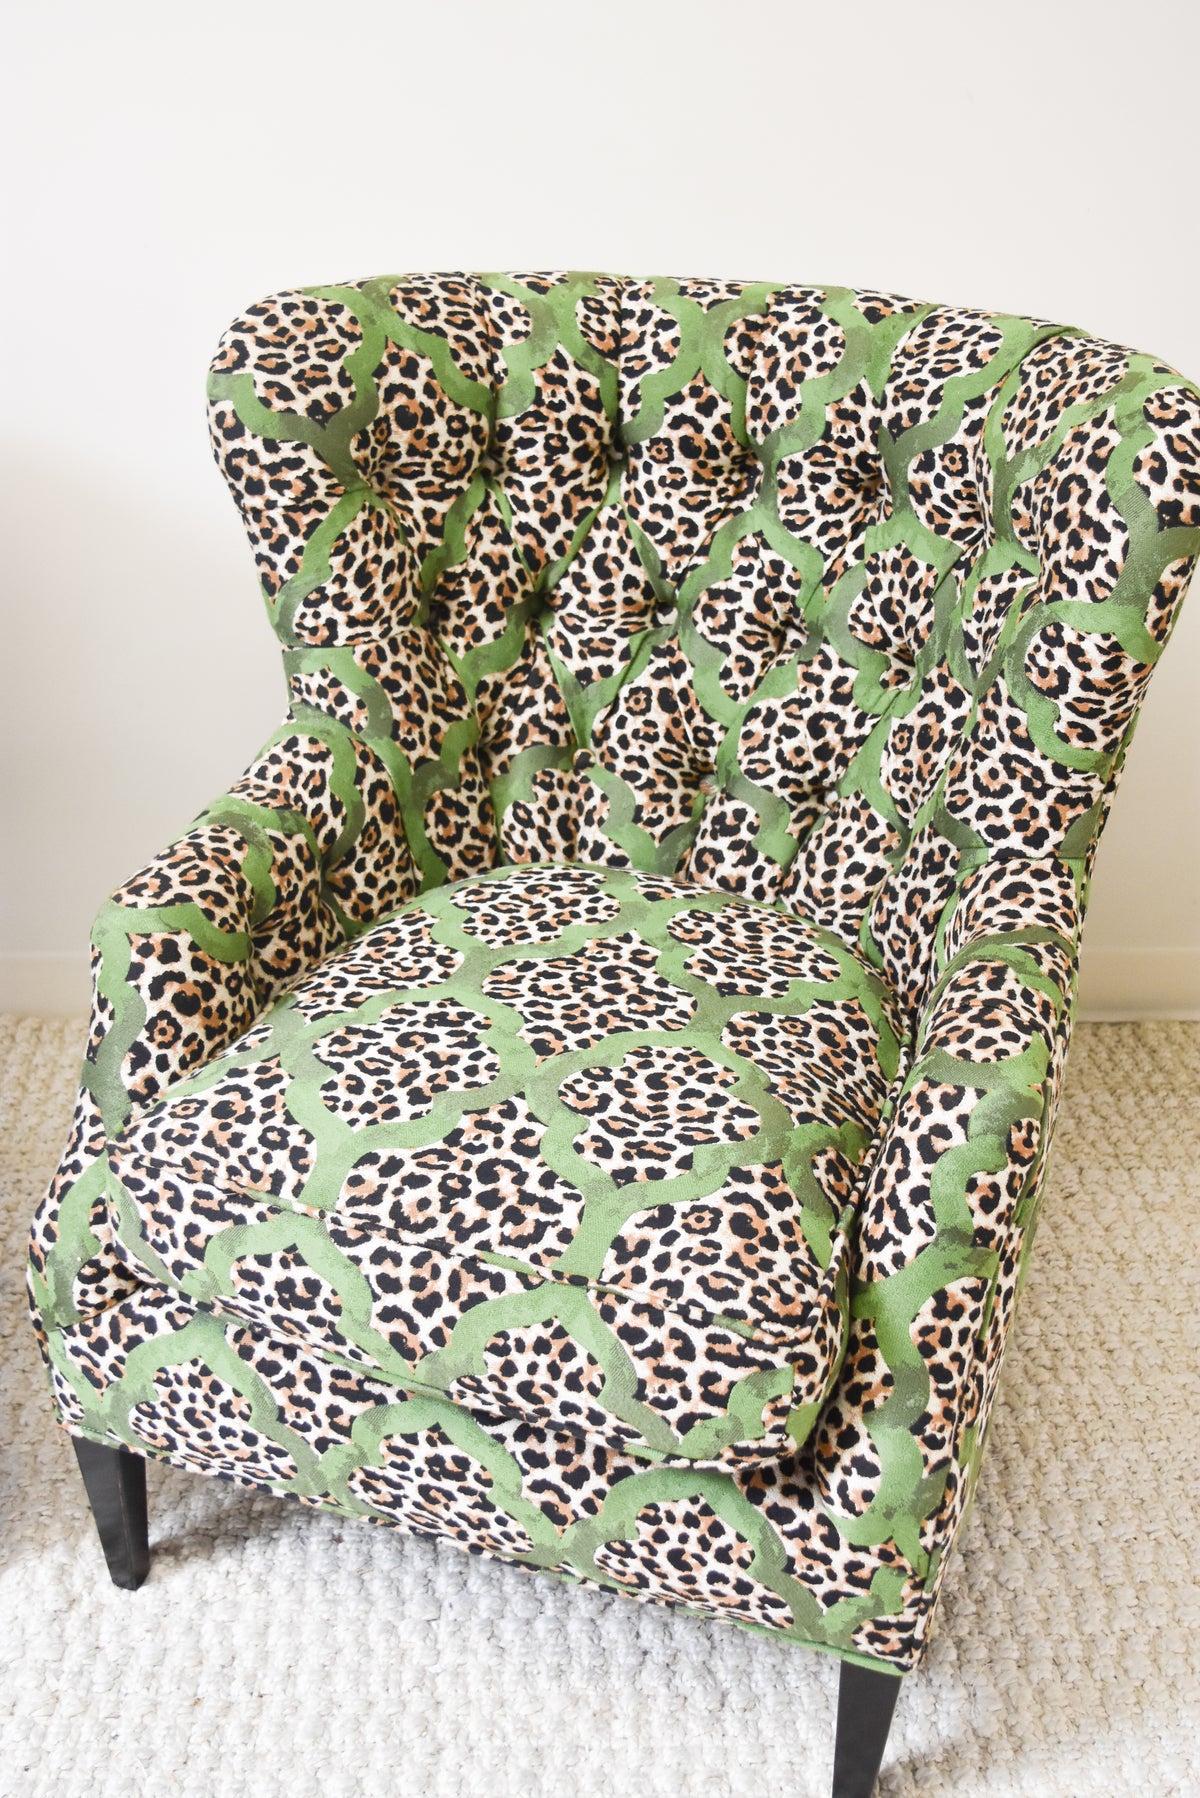 Pair of Leopard Print Chairs